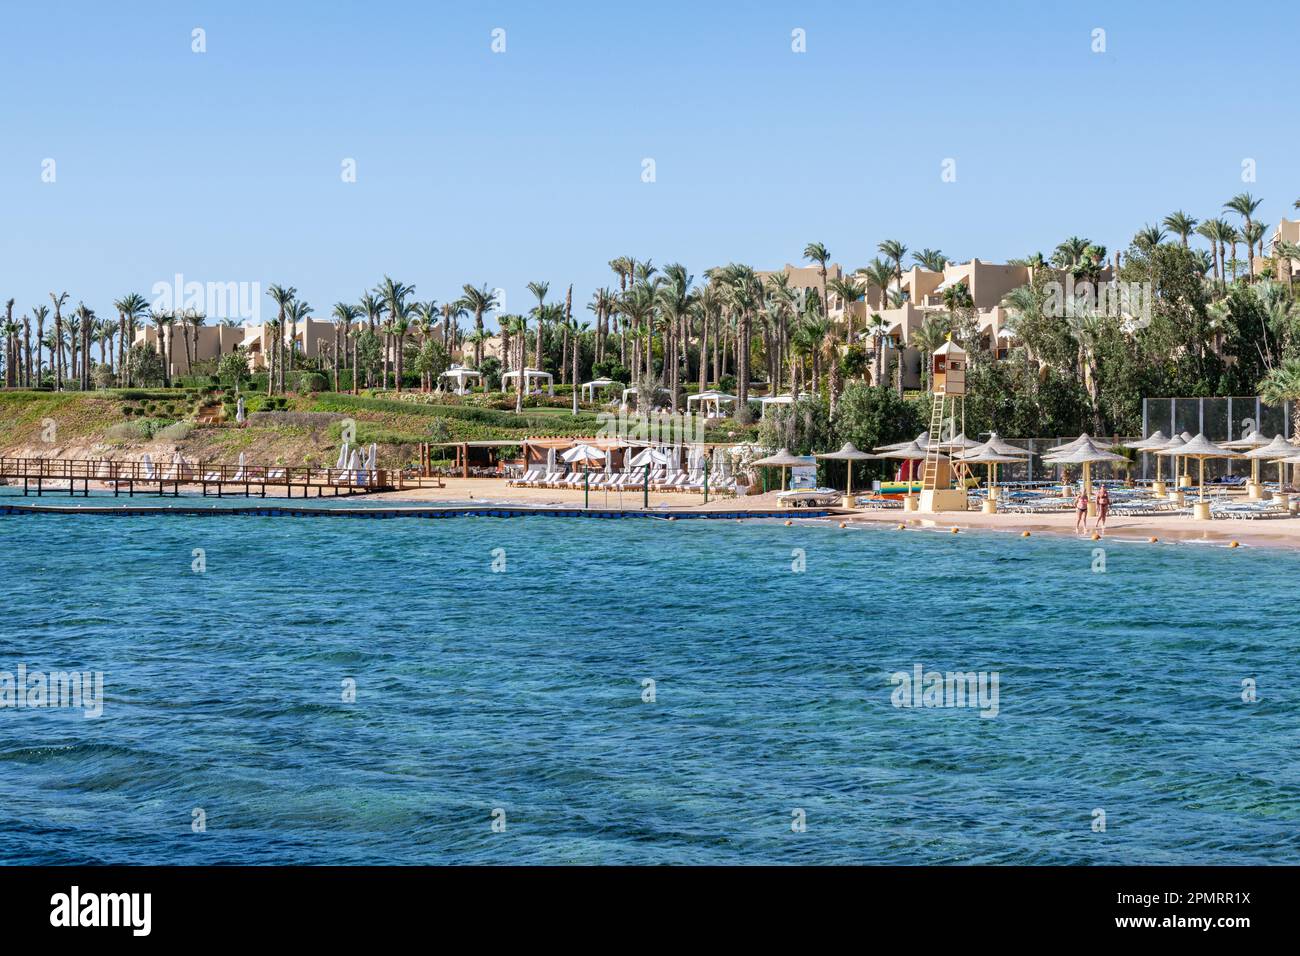 A view of the deckchairs on the beach of the Royal Savoy luxury hotel in Sharm el-Sheikh, Egypt Stock Photo